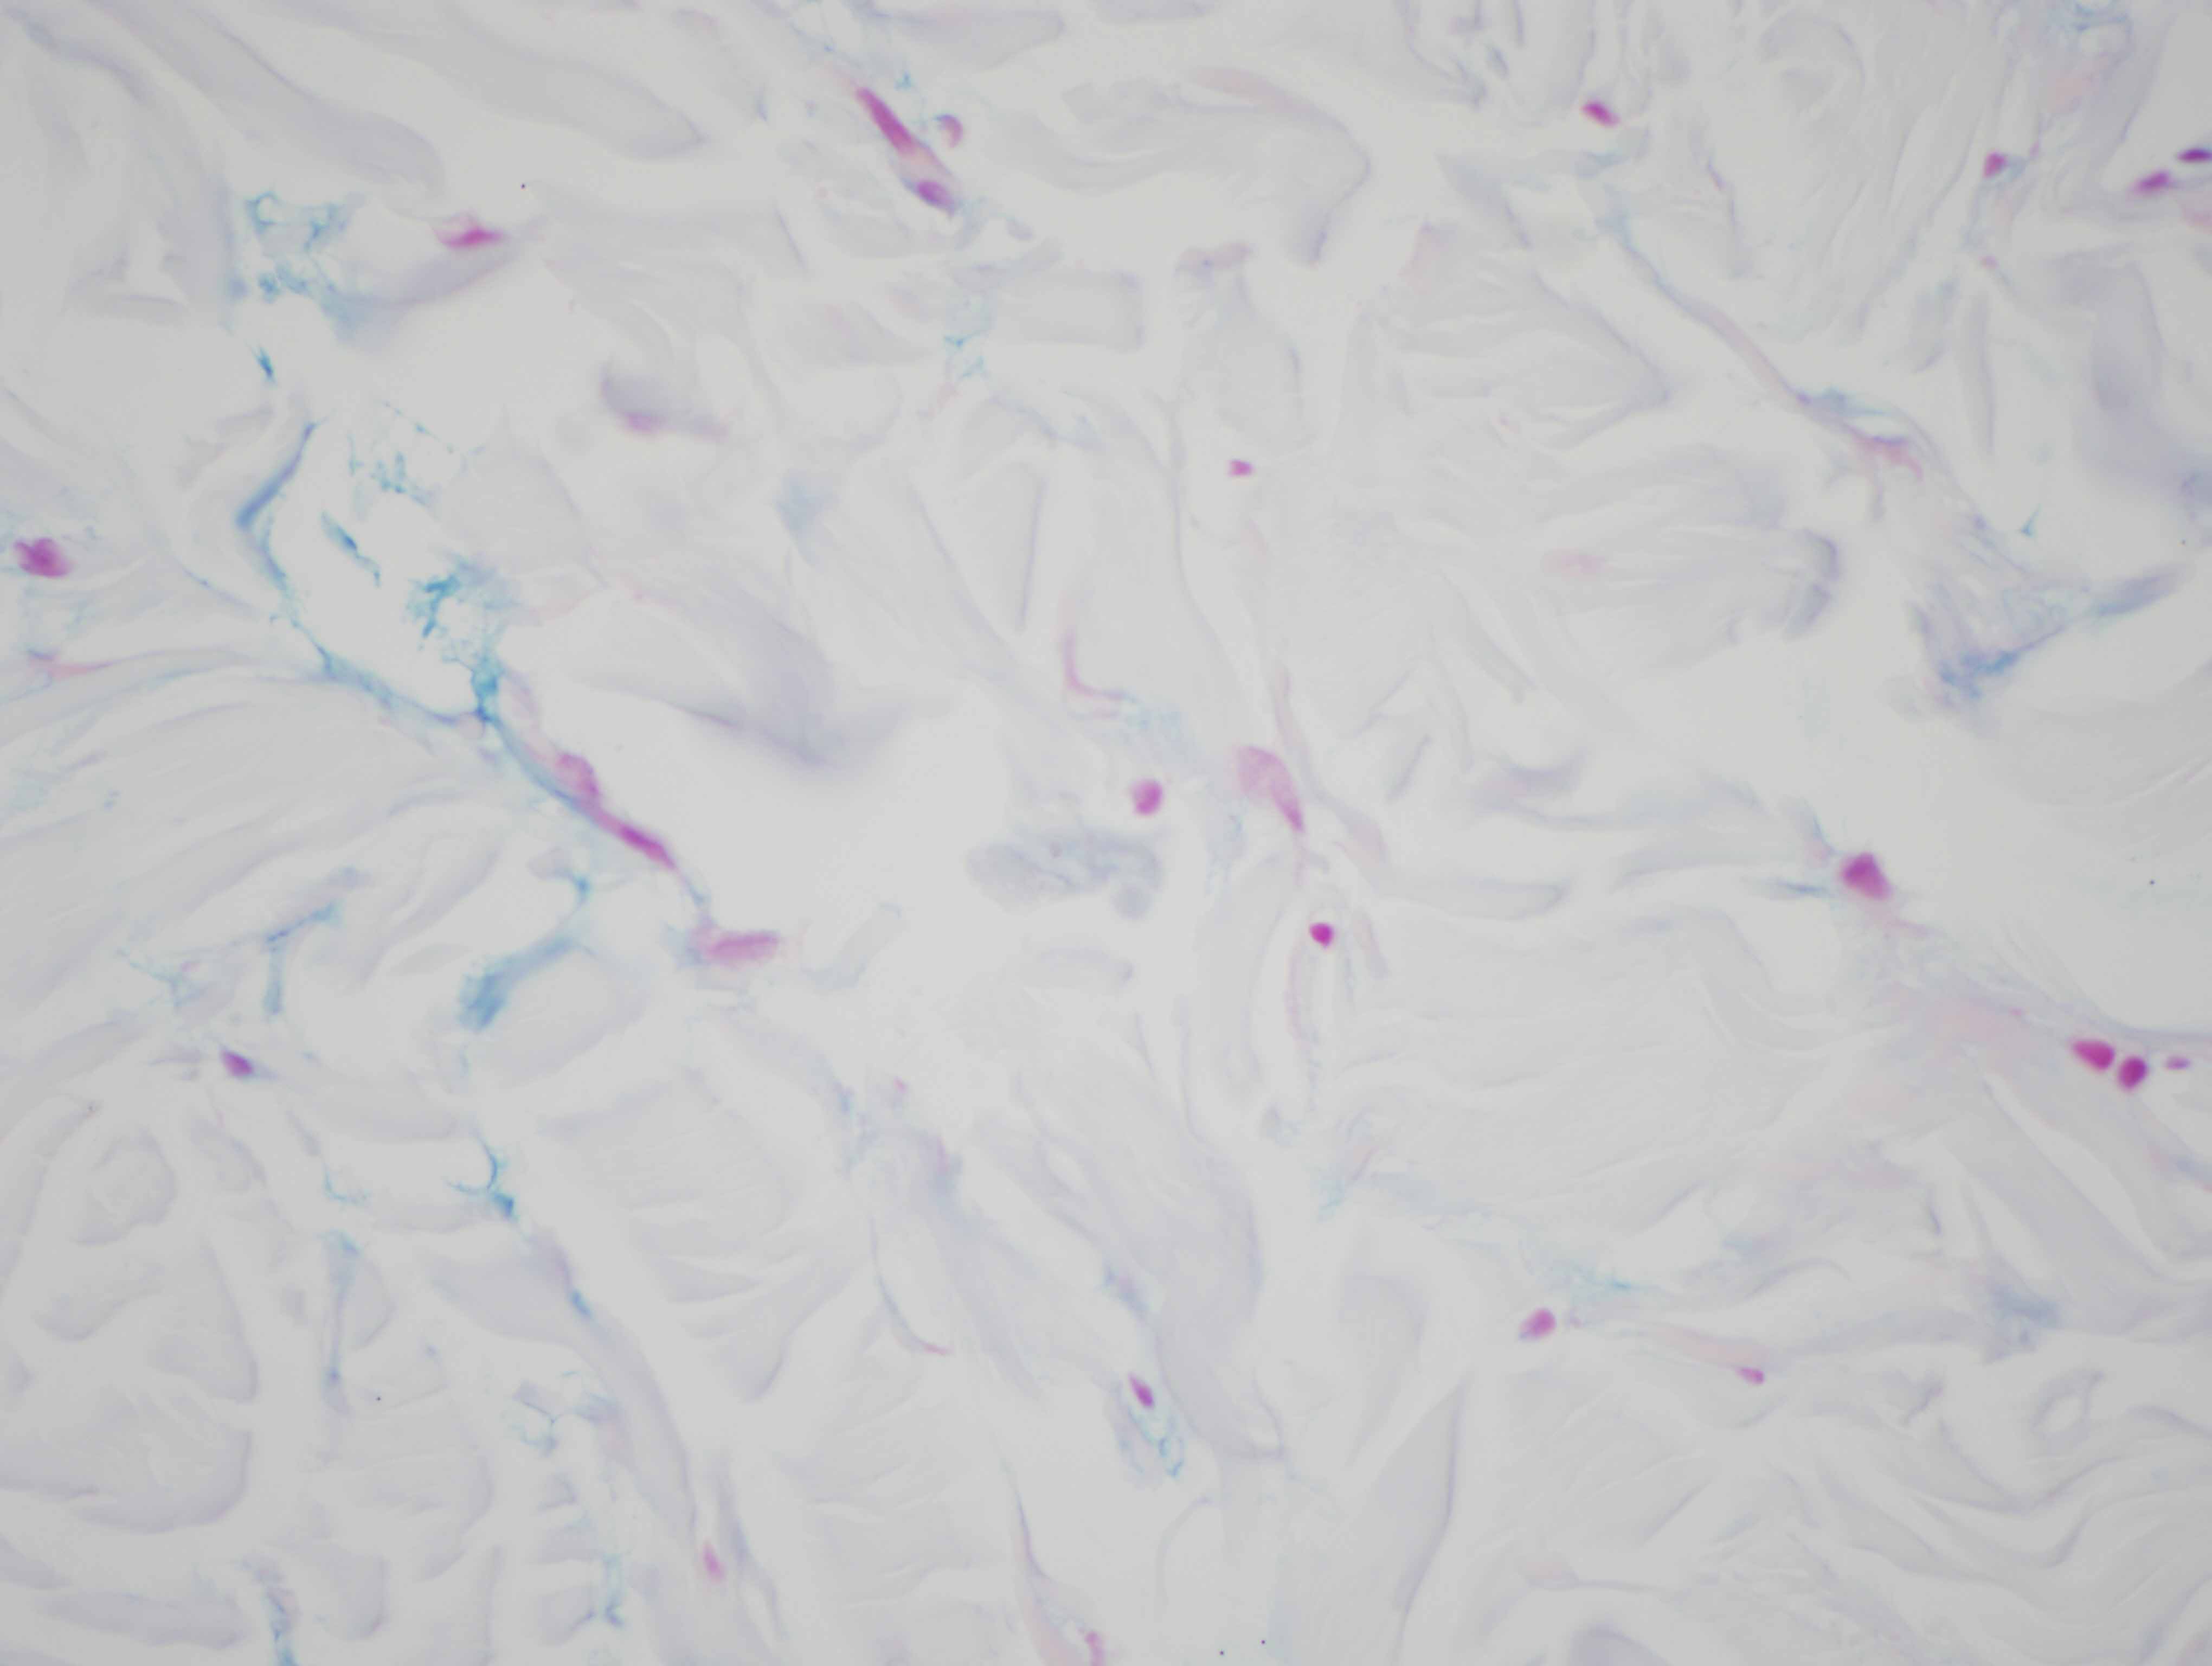 Slide 8: The Alcian blue stain shows areas of moderate interstitial mucin deposition.